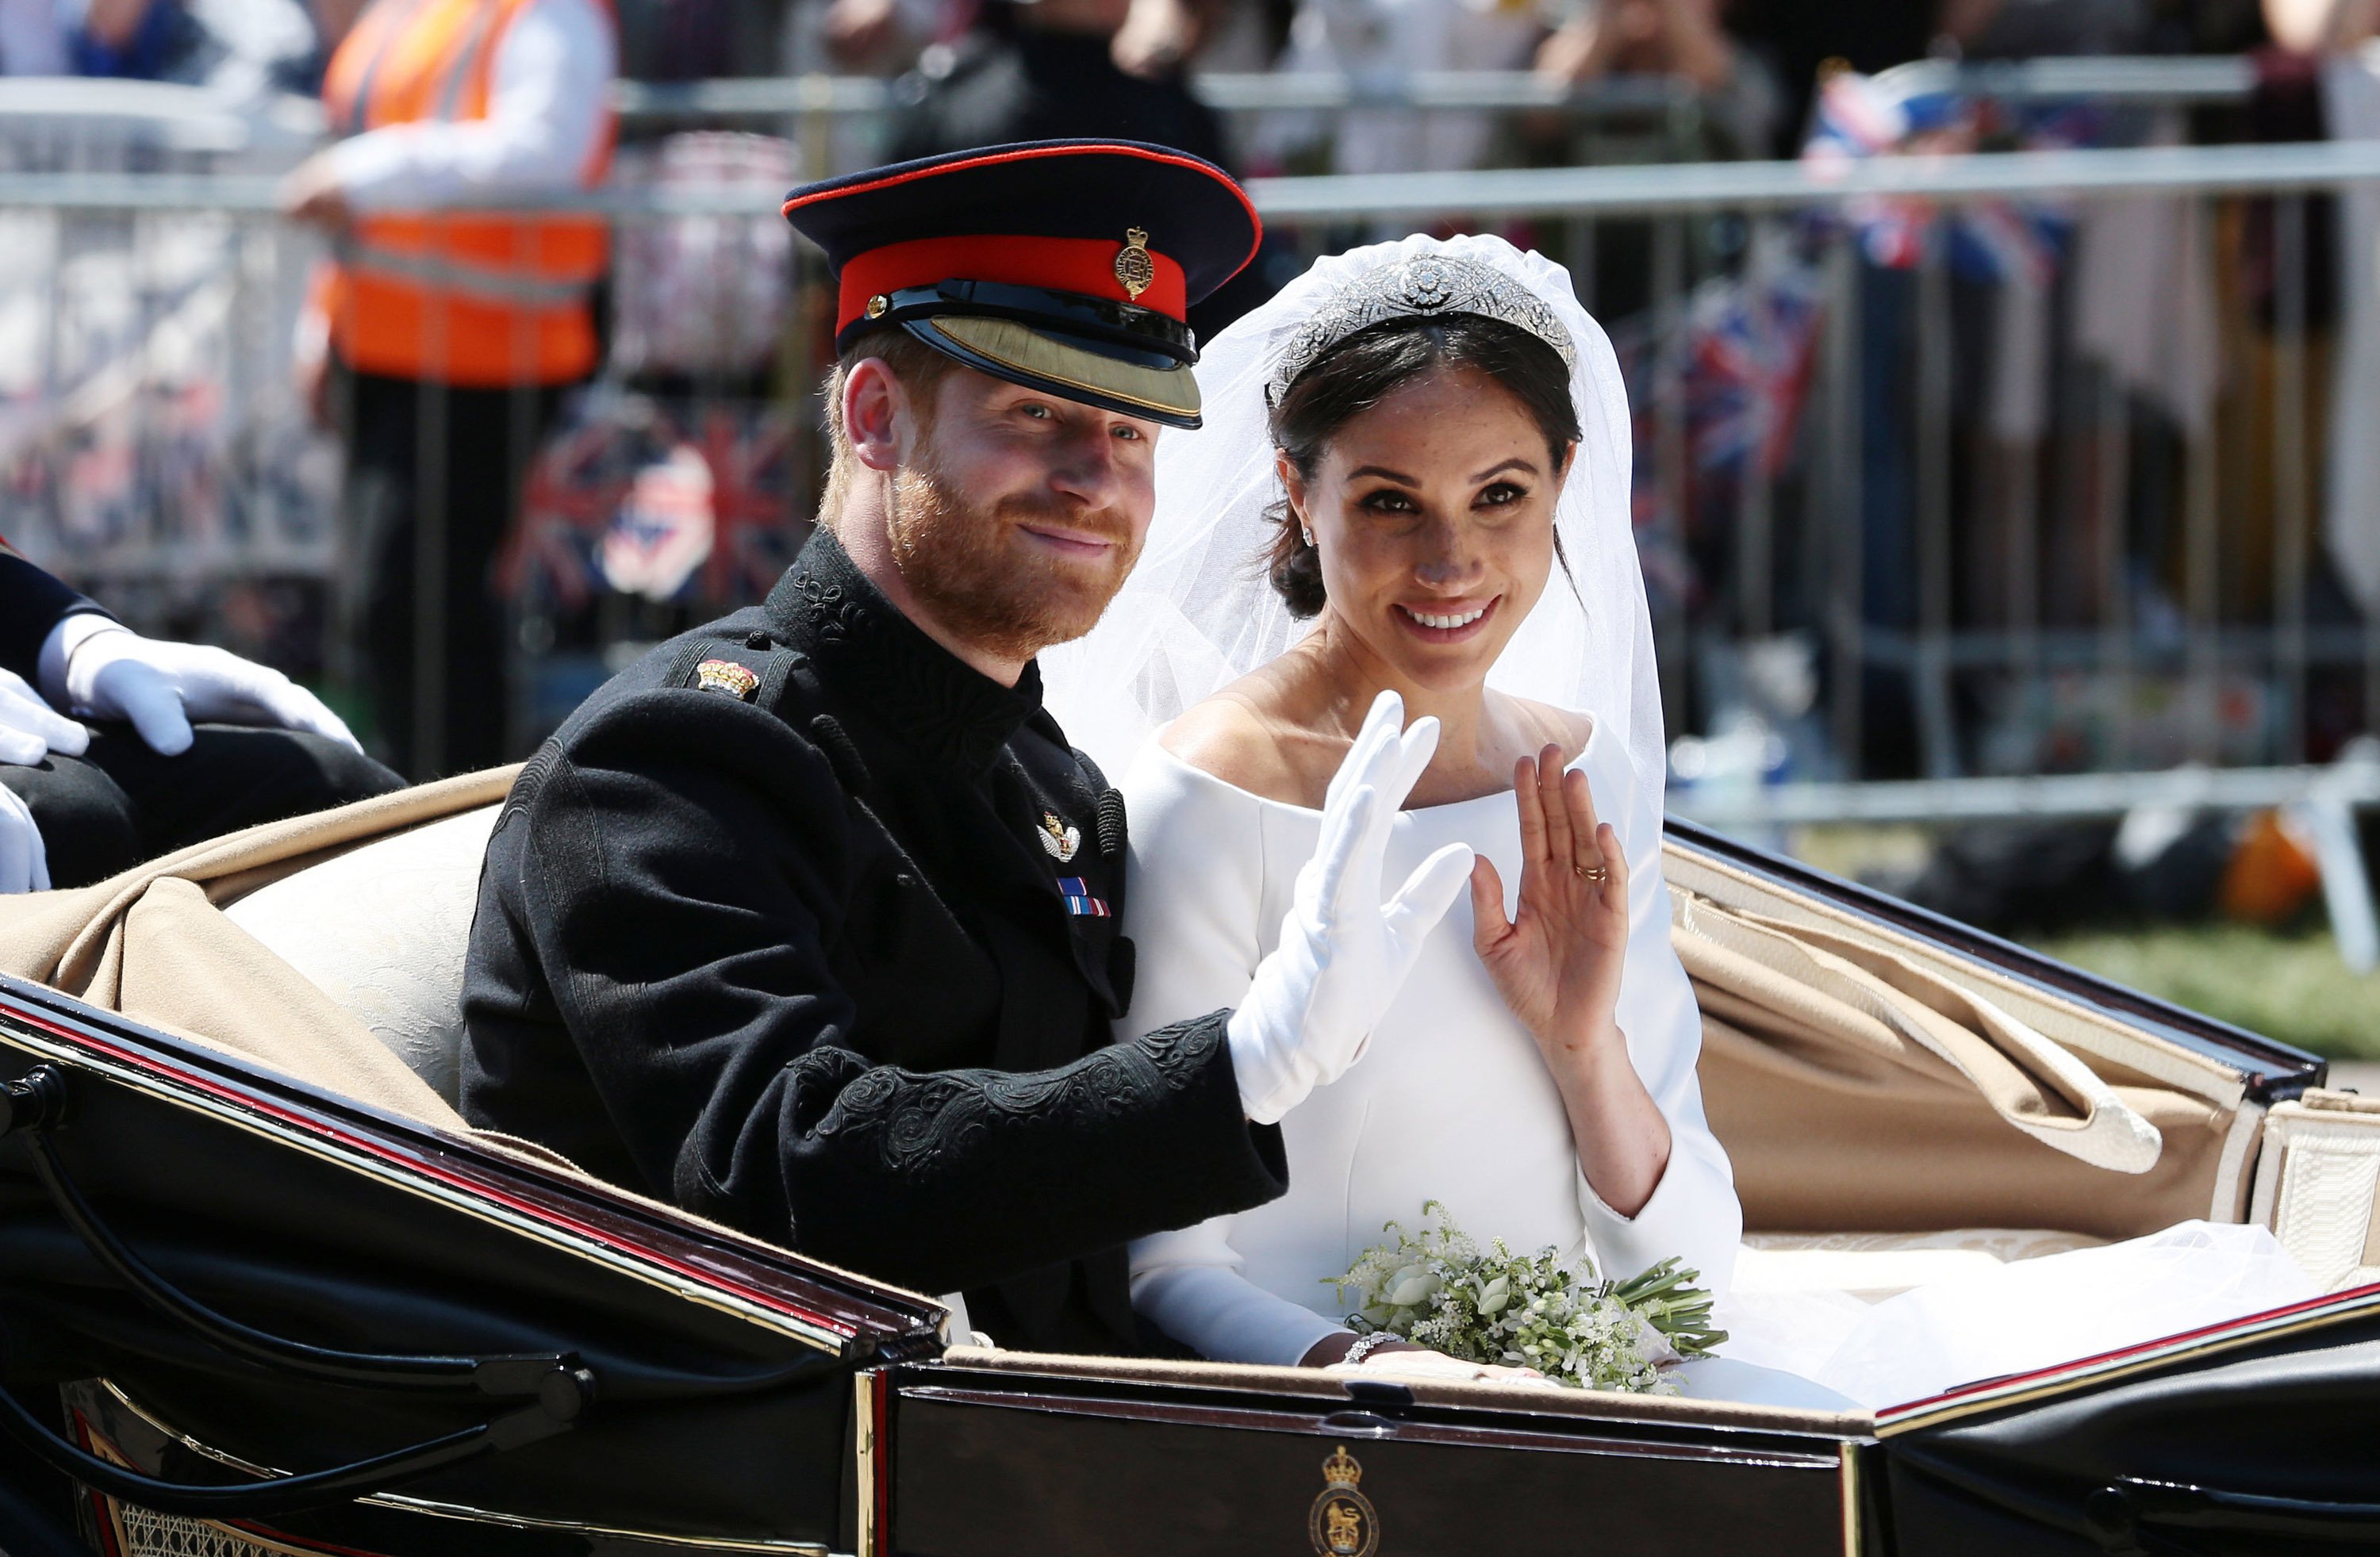 Prince Harry, Duke of Sussex and Meghan, Duchess of Sussex pictured waving from the Ascot Landau Carriage during their carriage procession on Castle Hill outside Windsor Castle in Windsor, on May 19, 2018. | Source: Getty Images